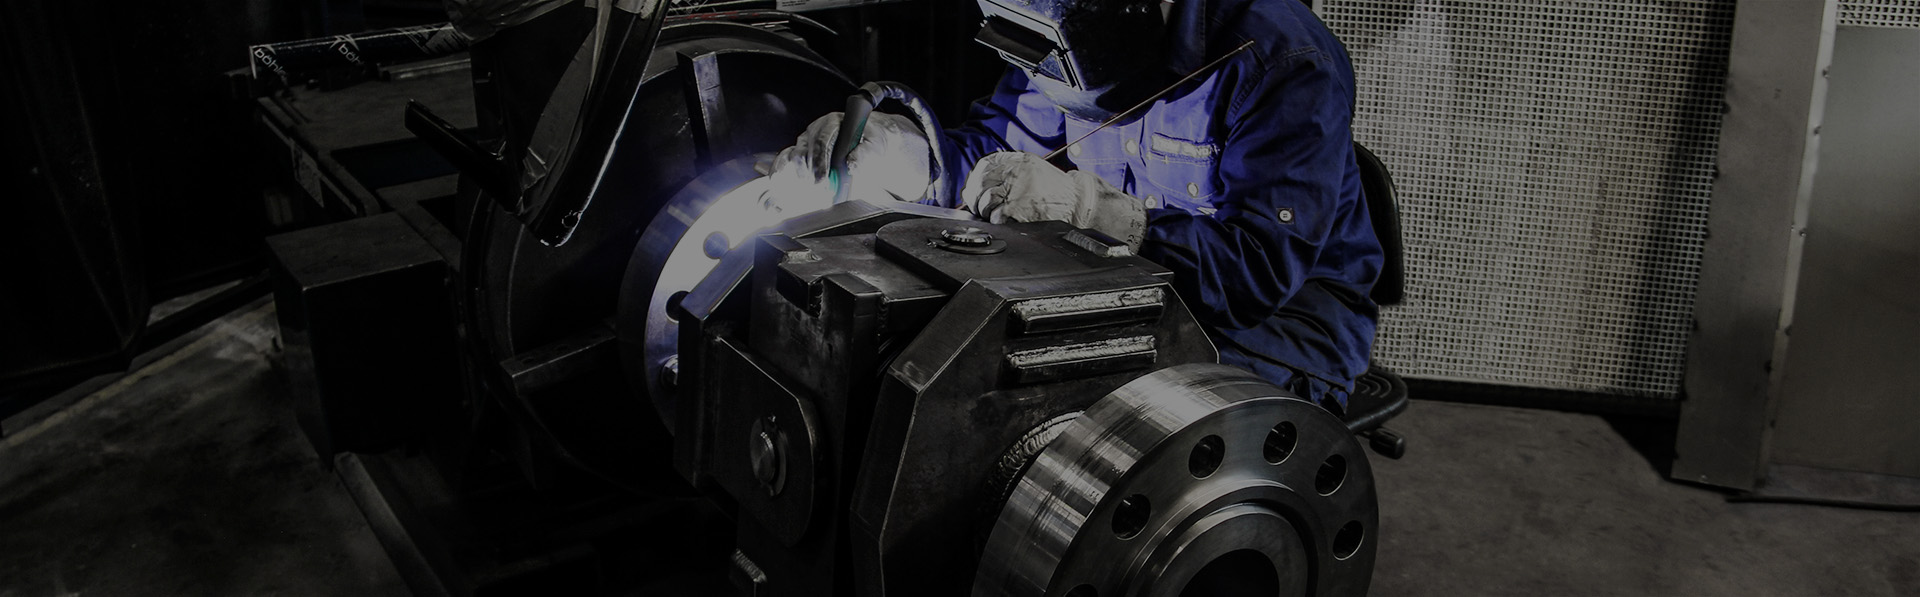 Belman is capable to weld high alloy materials